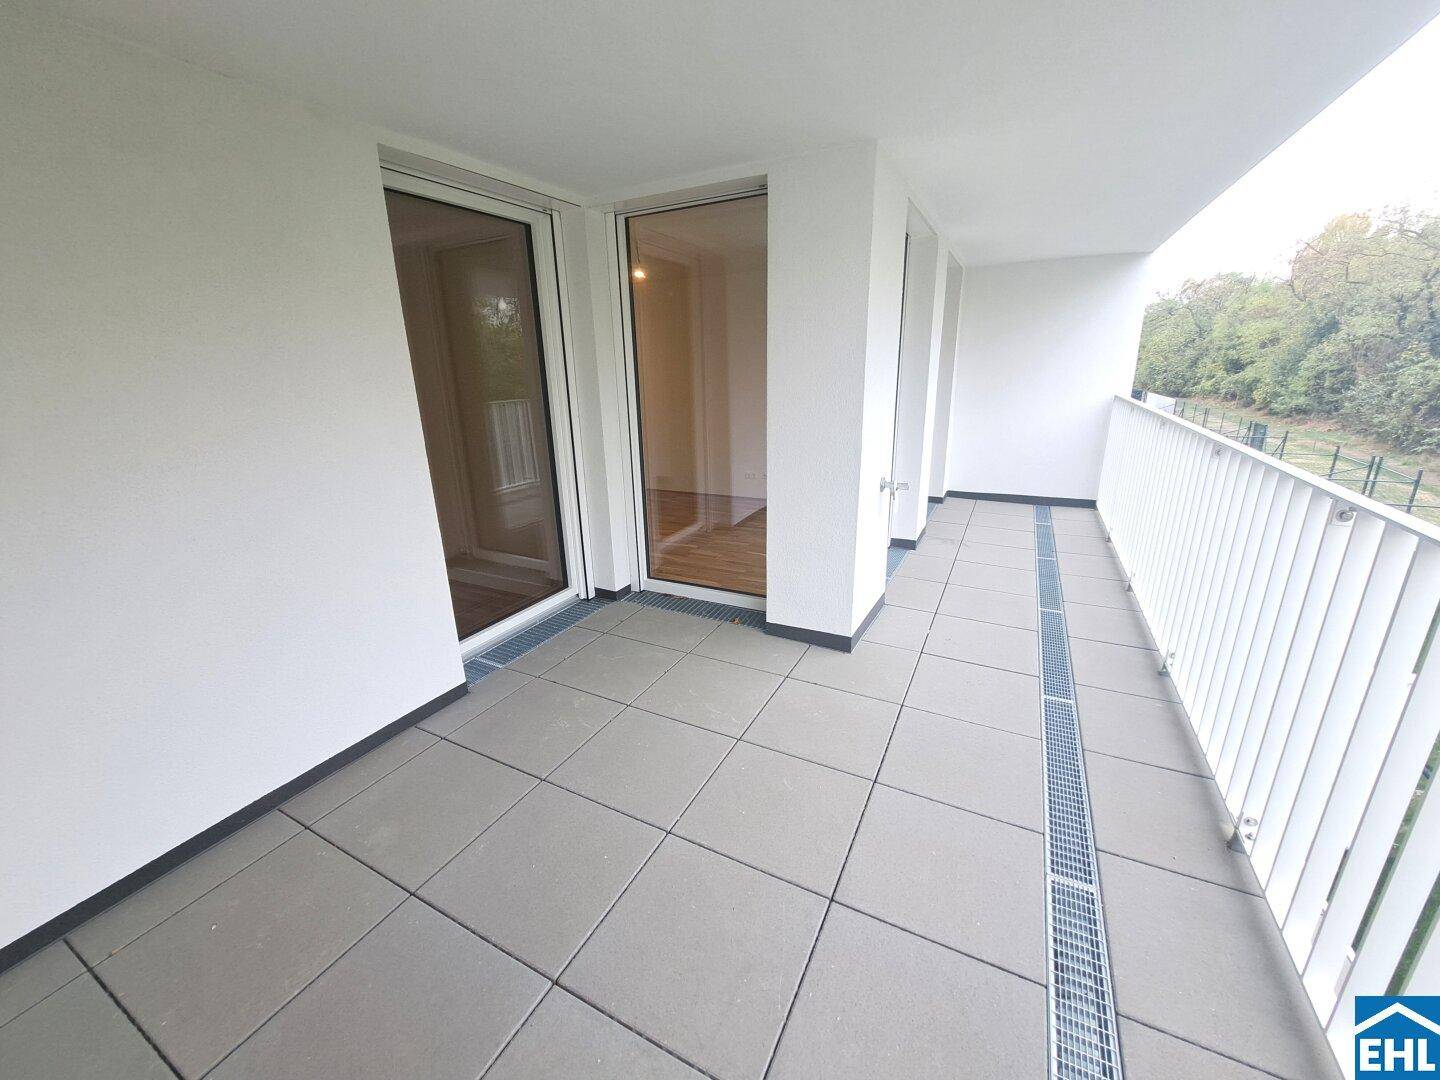 https://pictures.immobilienscout24.de/prod.www.immobilienscout24.at/pictureserver/loadPicture?q=70&id=012.0012000001E83tC-1699883527-ae4b13d152804a35adf96ee36801ee52